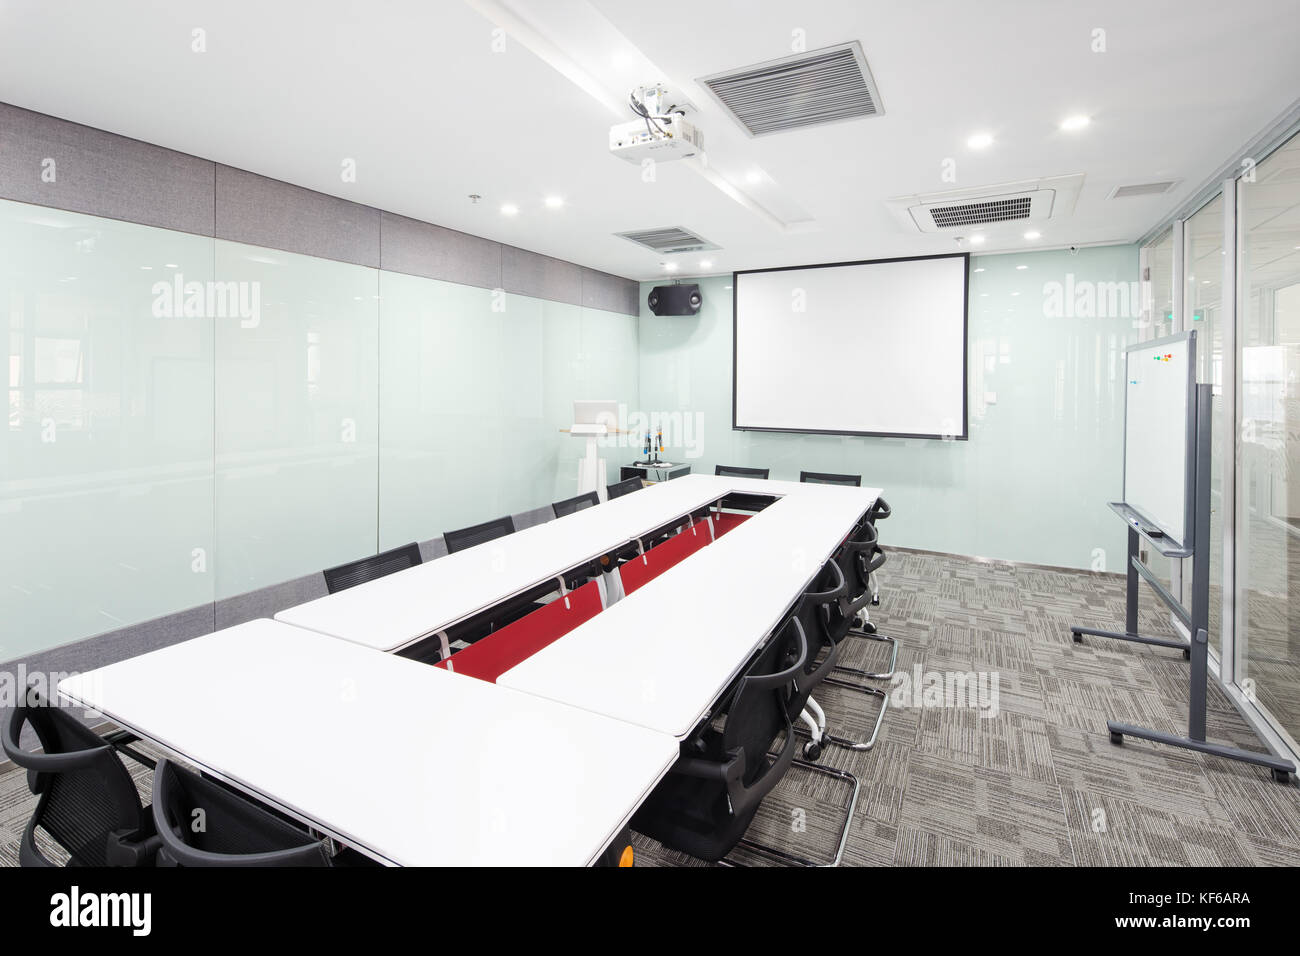 design and decoration in modern meeting room Stock Photo - Alamy